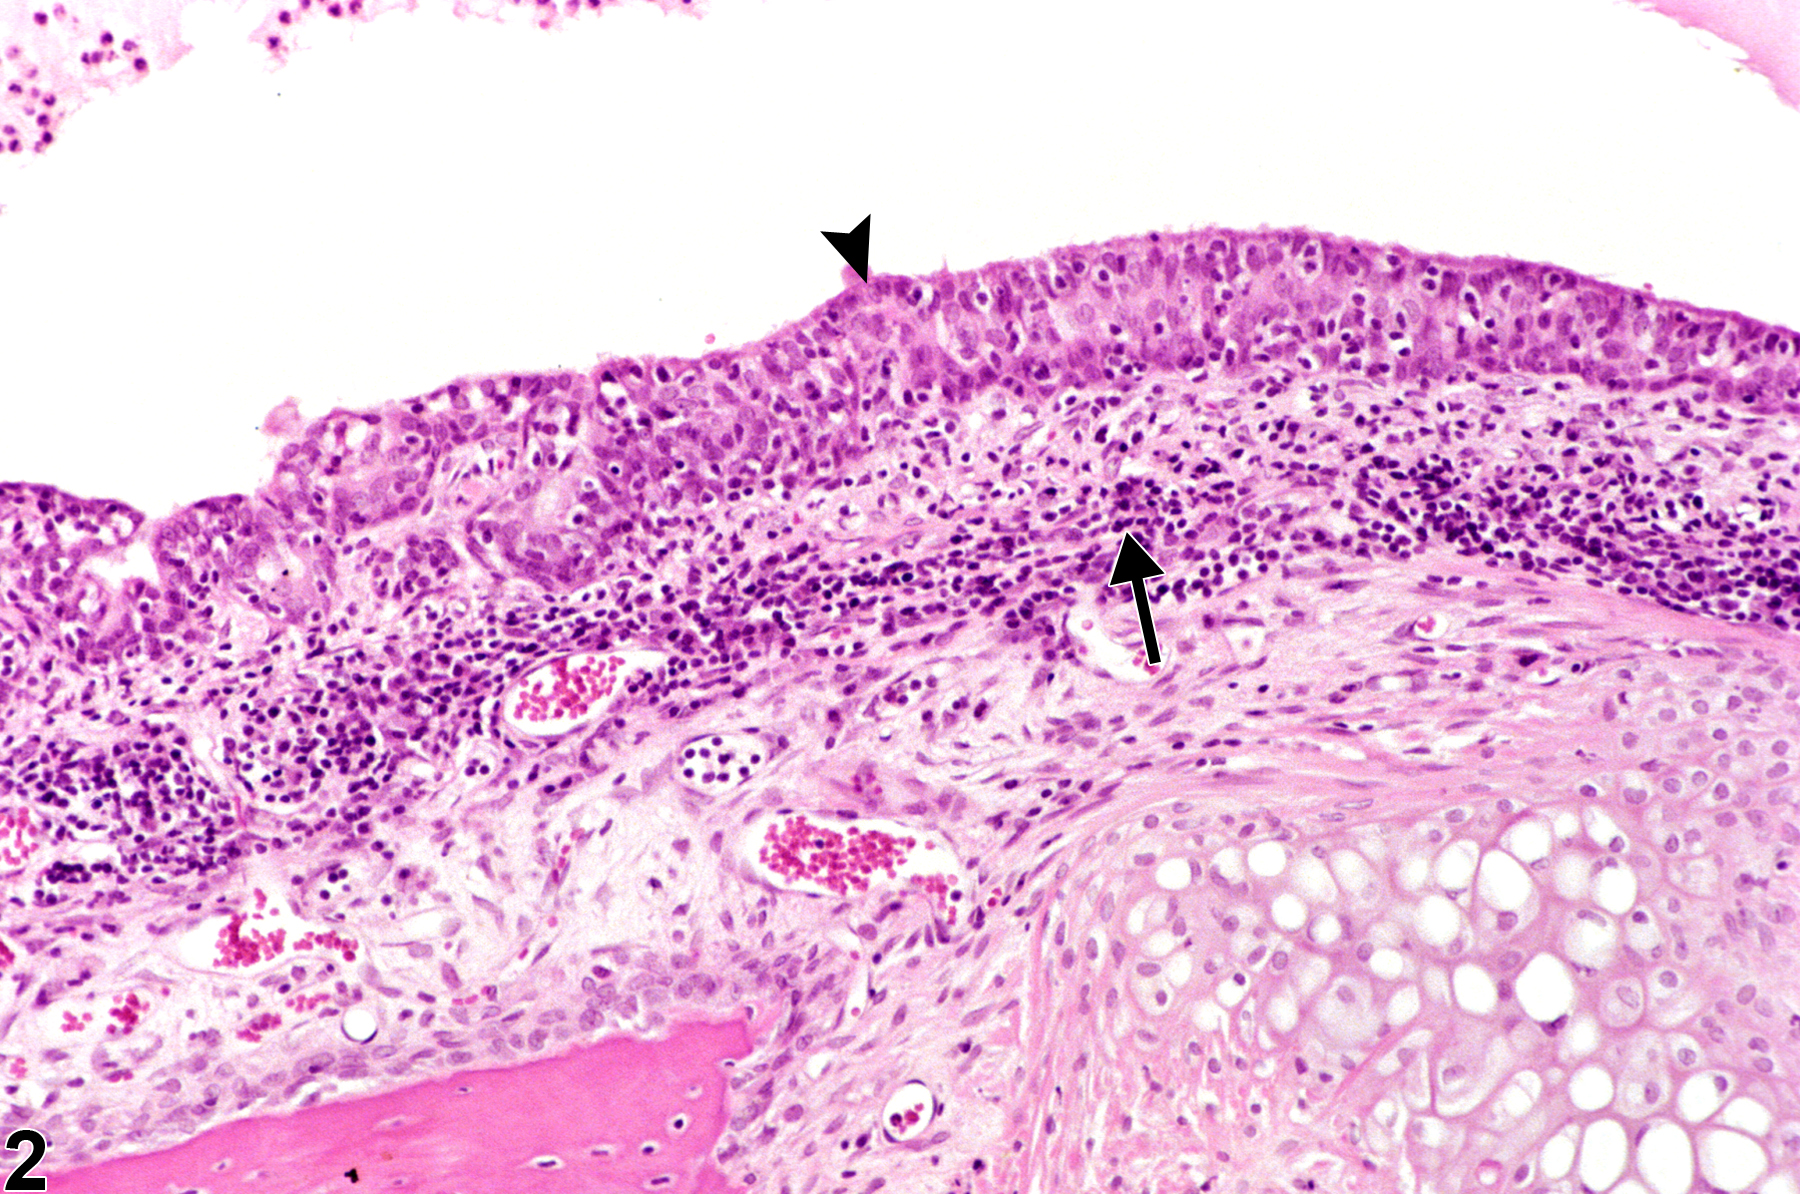 Image of inflammation in the ear from a male F344/N rat in a chronic study